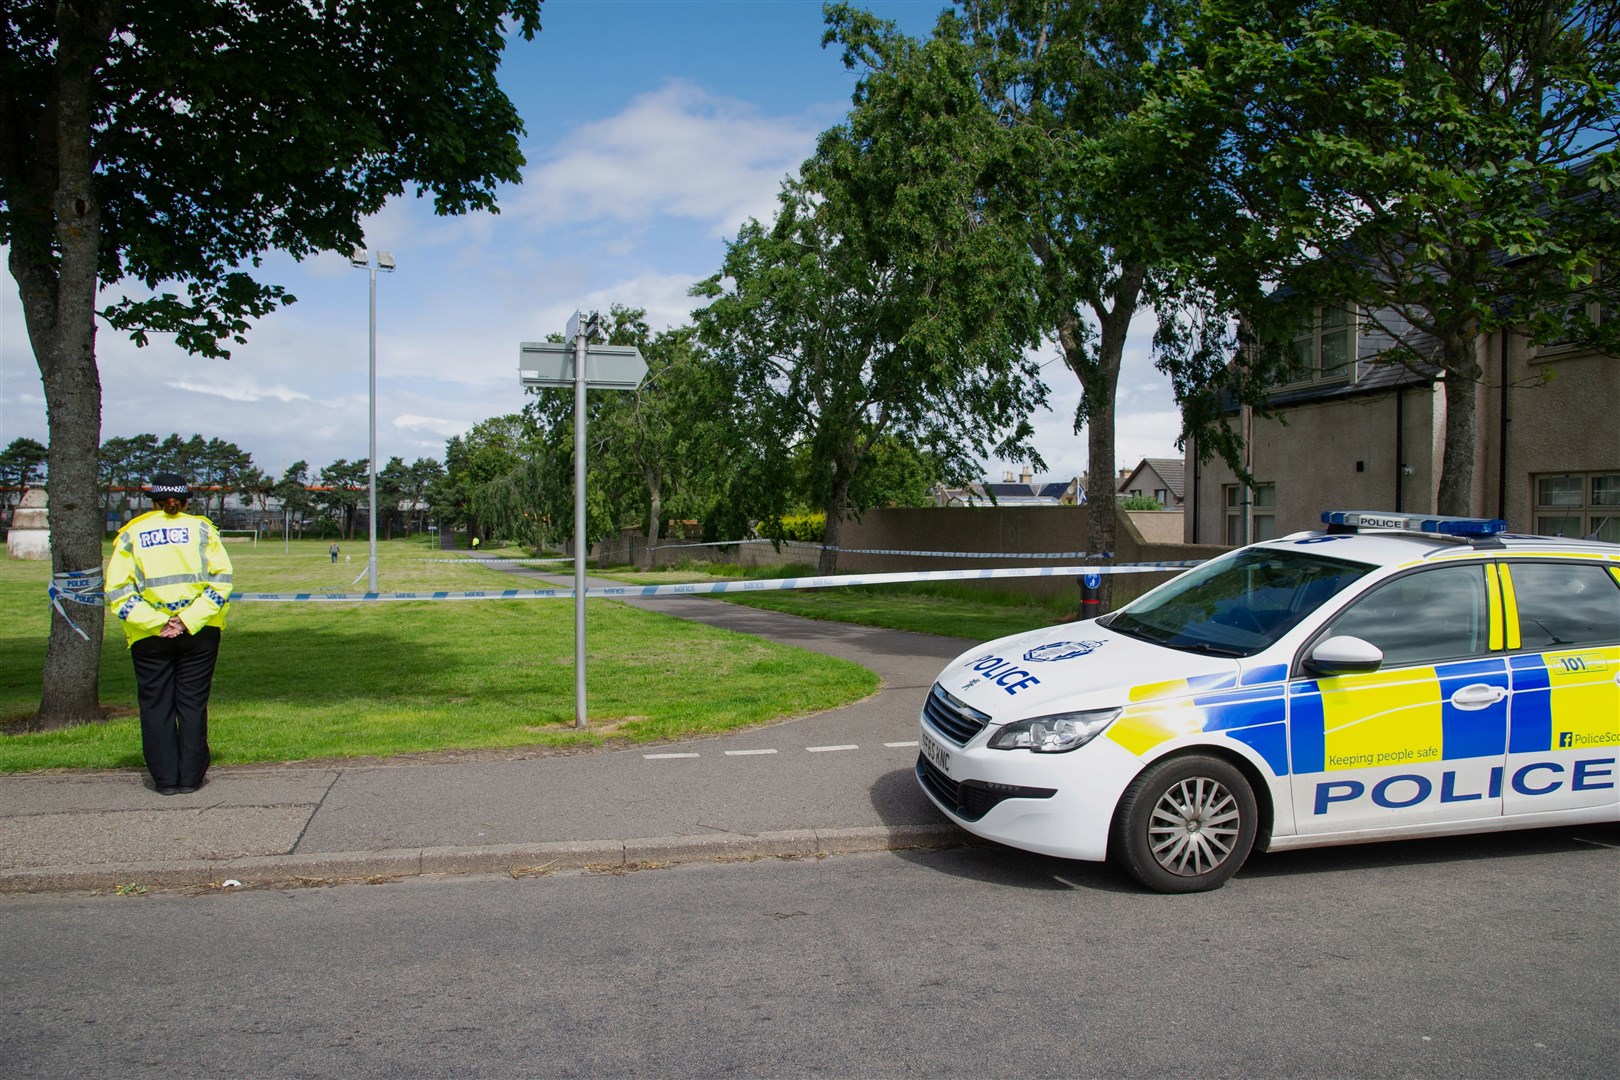 Police cordoned off the corner of Doocot Park last month after the report of a sexual assault.